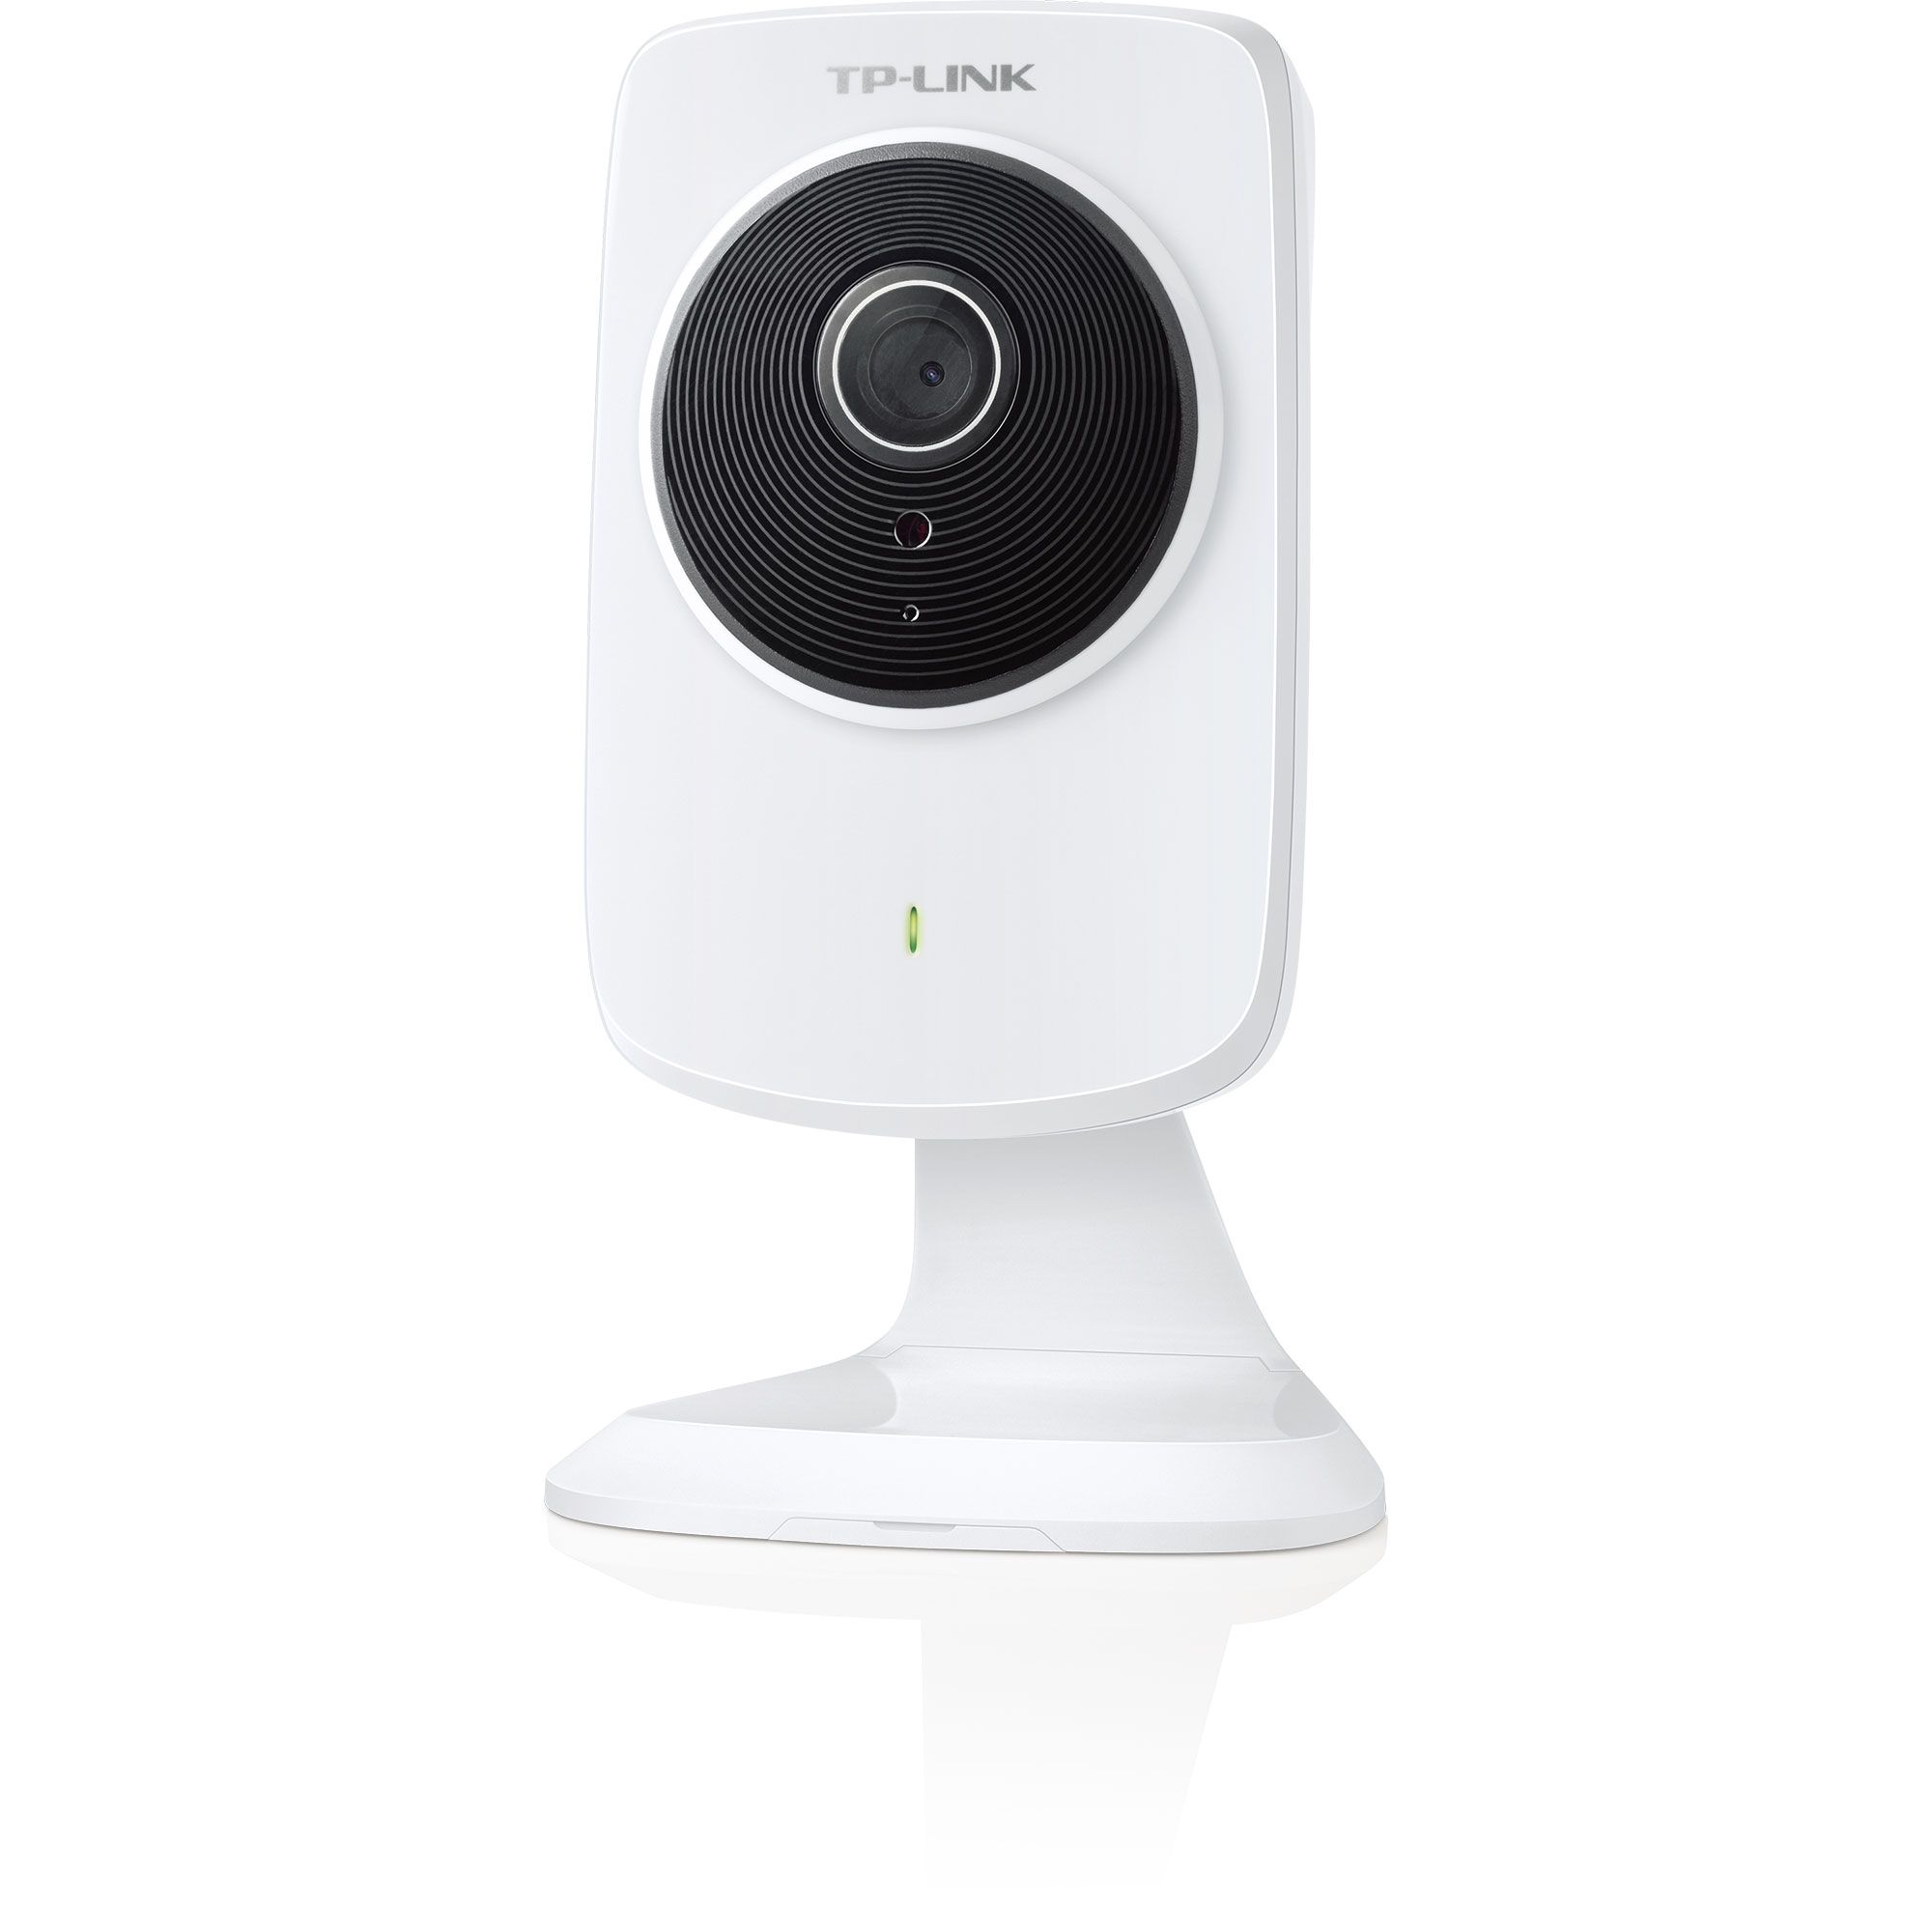 Tp Link 0.3MP Color Network Camera   Tools   Home Security & Safety